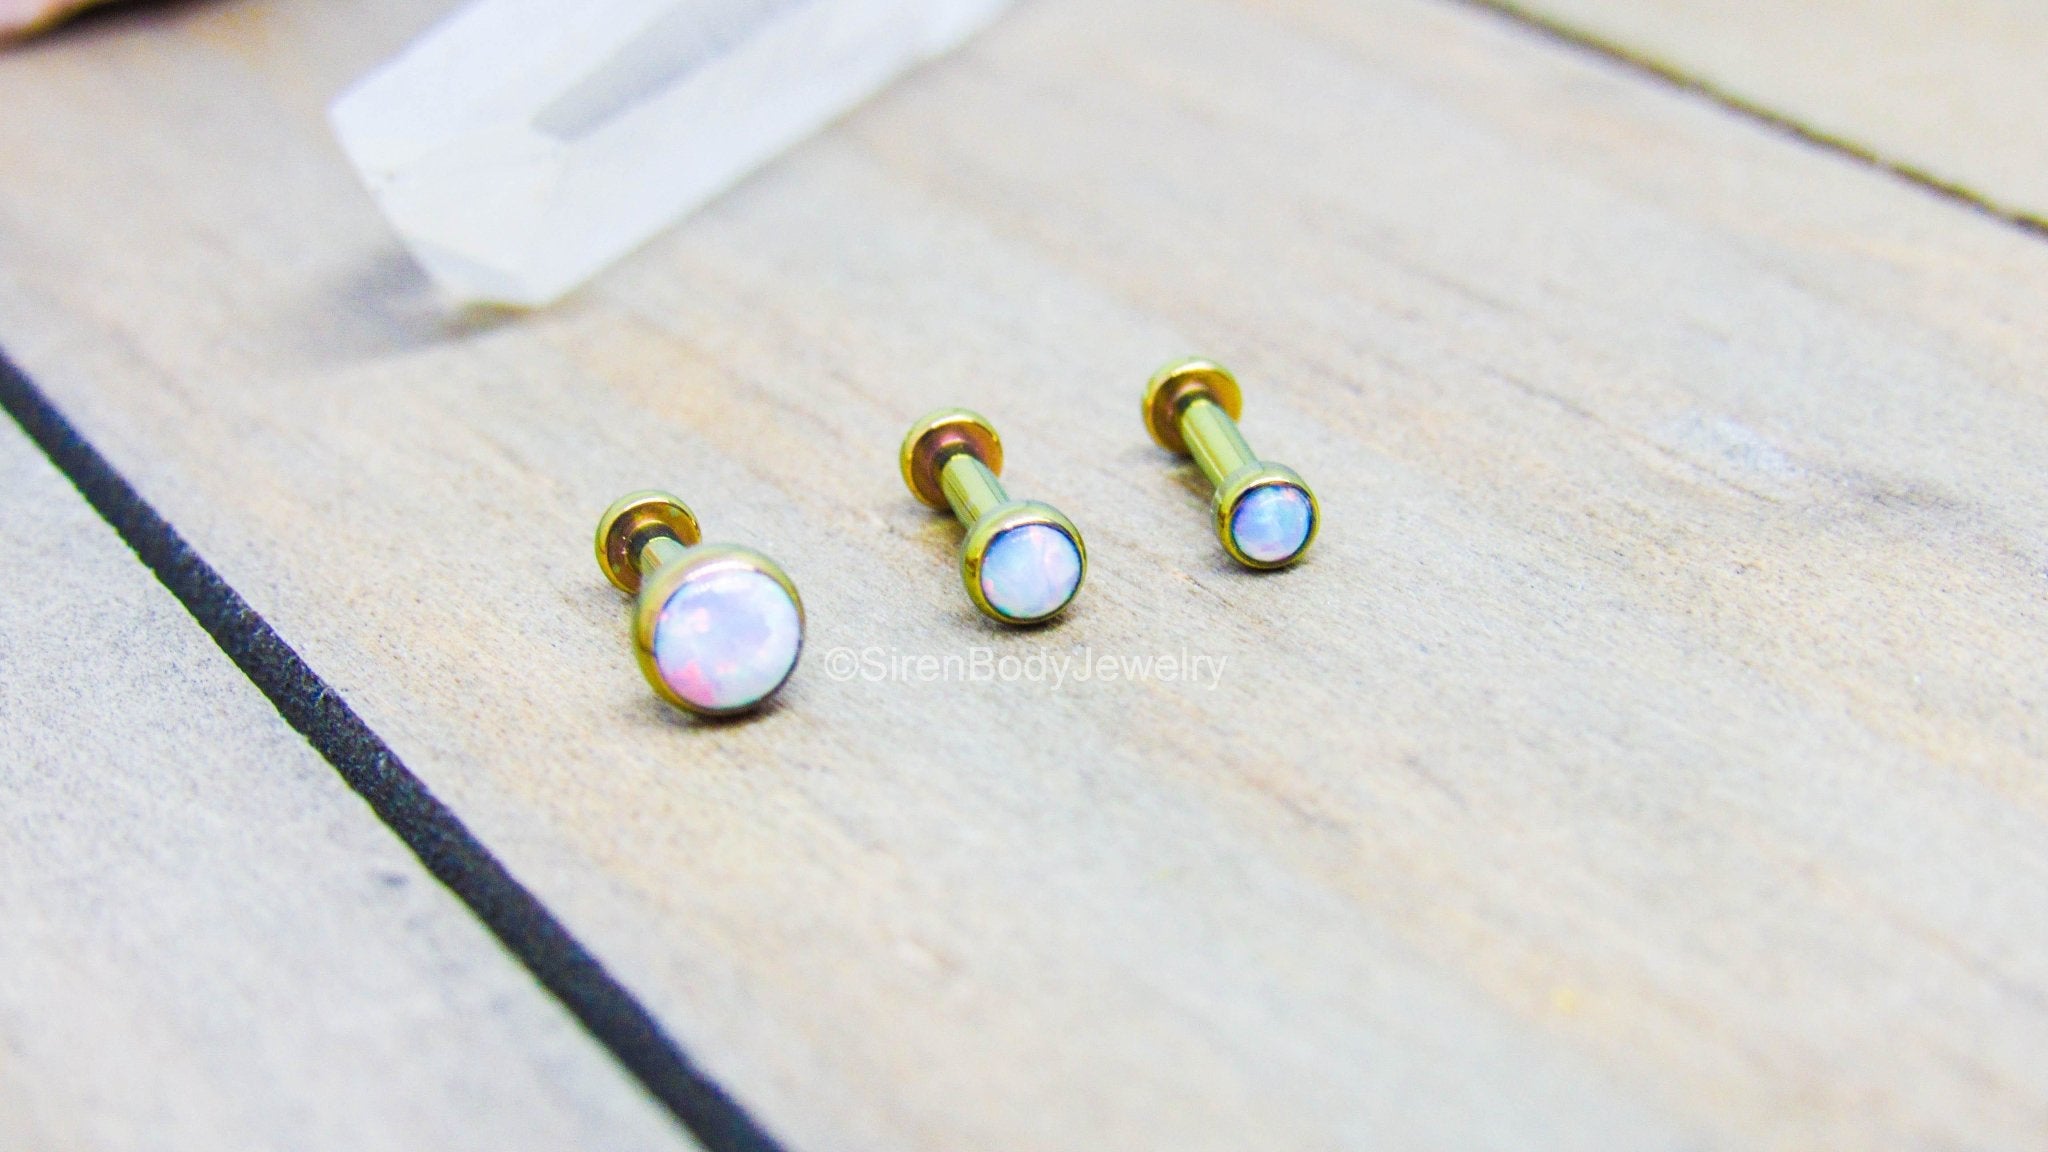 Ear Earrings White Gold with Yellow Gold Helix Hoops (Made to Order) —  KRISTY LIN